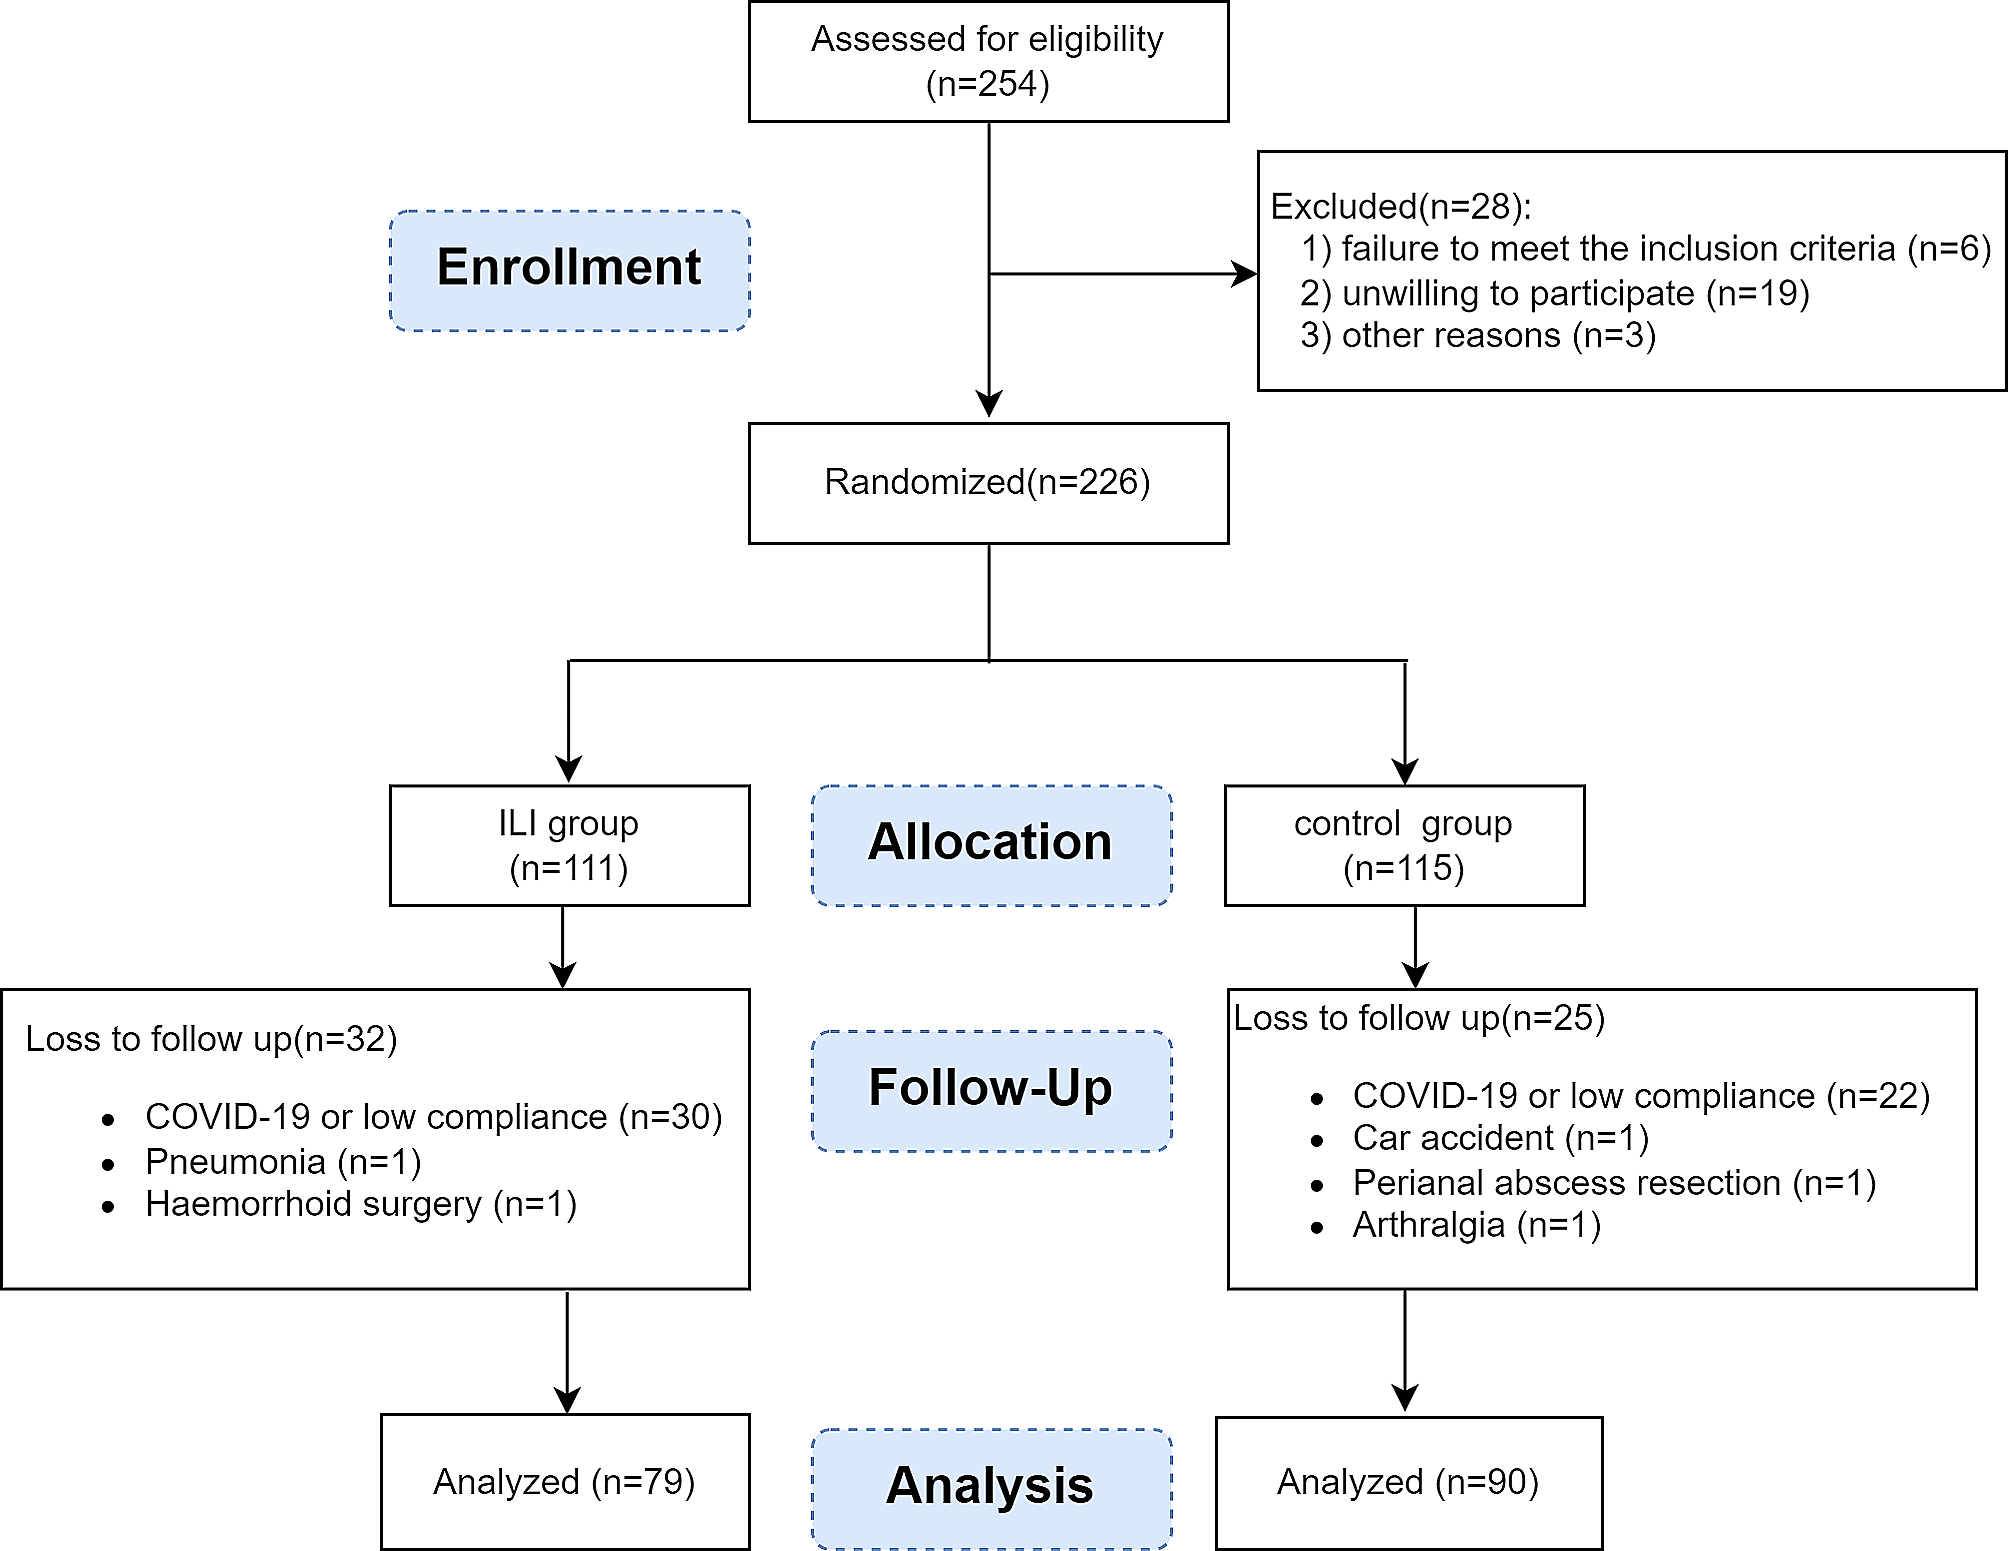 A comprehensive approach to lifestyle intervention based on a calorie-restricted diet ameliorates liver fat in overweight/obese patients with NAFLD: a multicenter randomized controlled trial in China